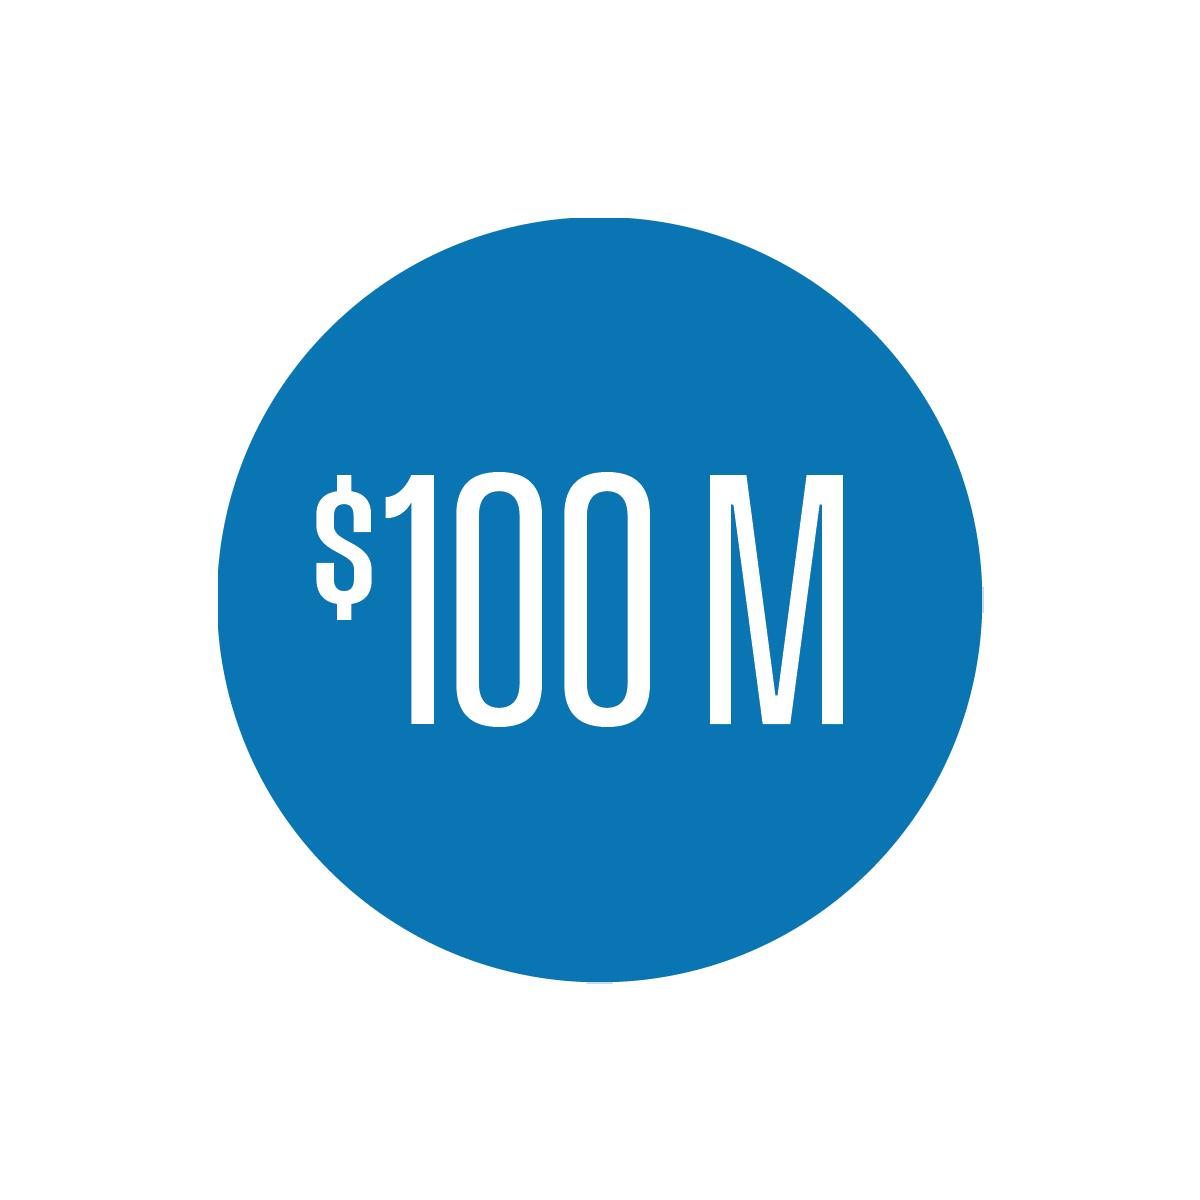 White text that says "$100 Million" inside of a blue circle. The Circle is a shade a blue that is UD's primary color.